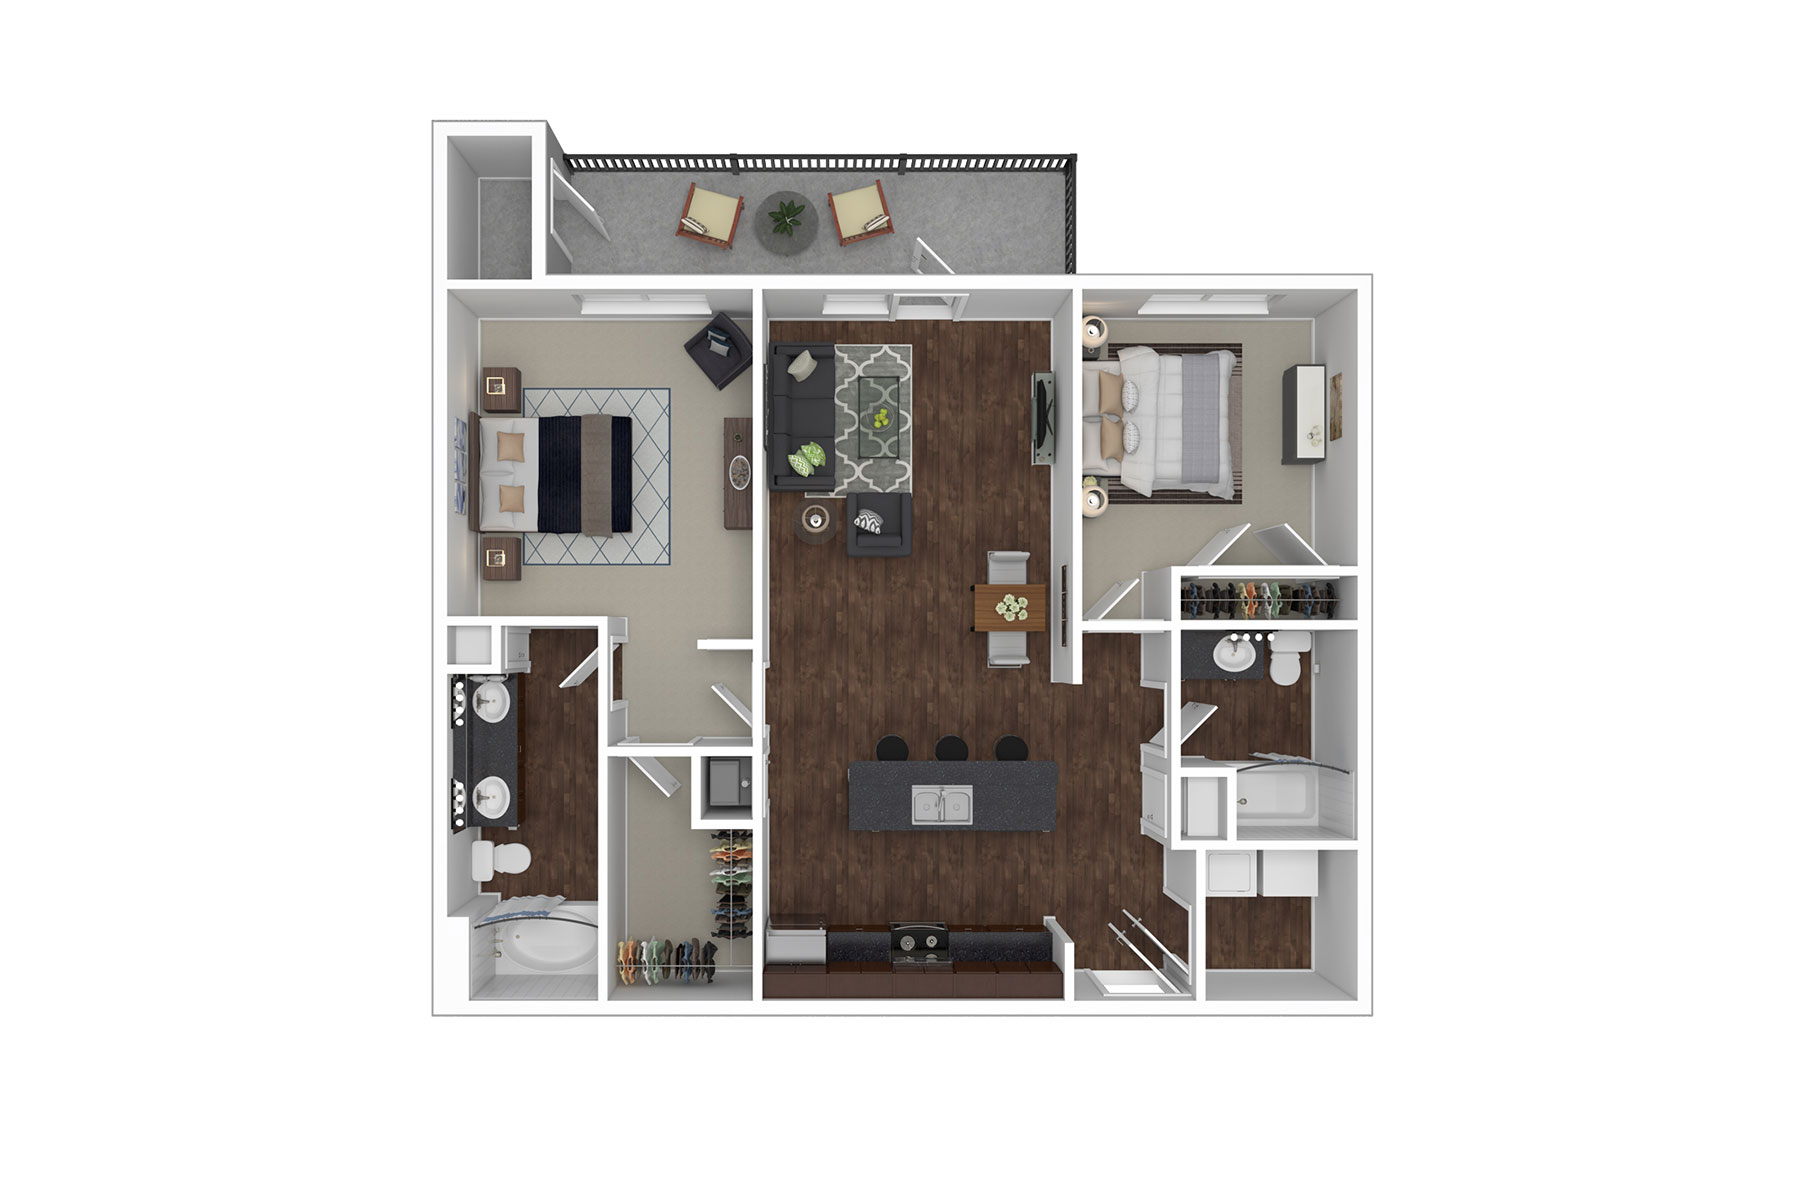 B1 floor plan - Madison at Westinghouse Apartments in Georgetown, TX